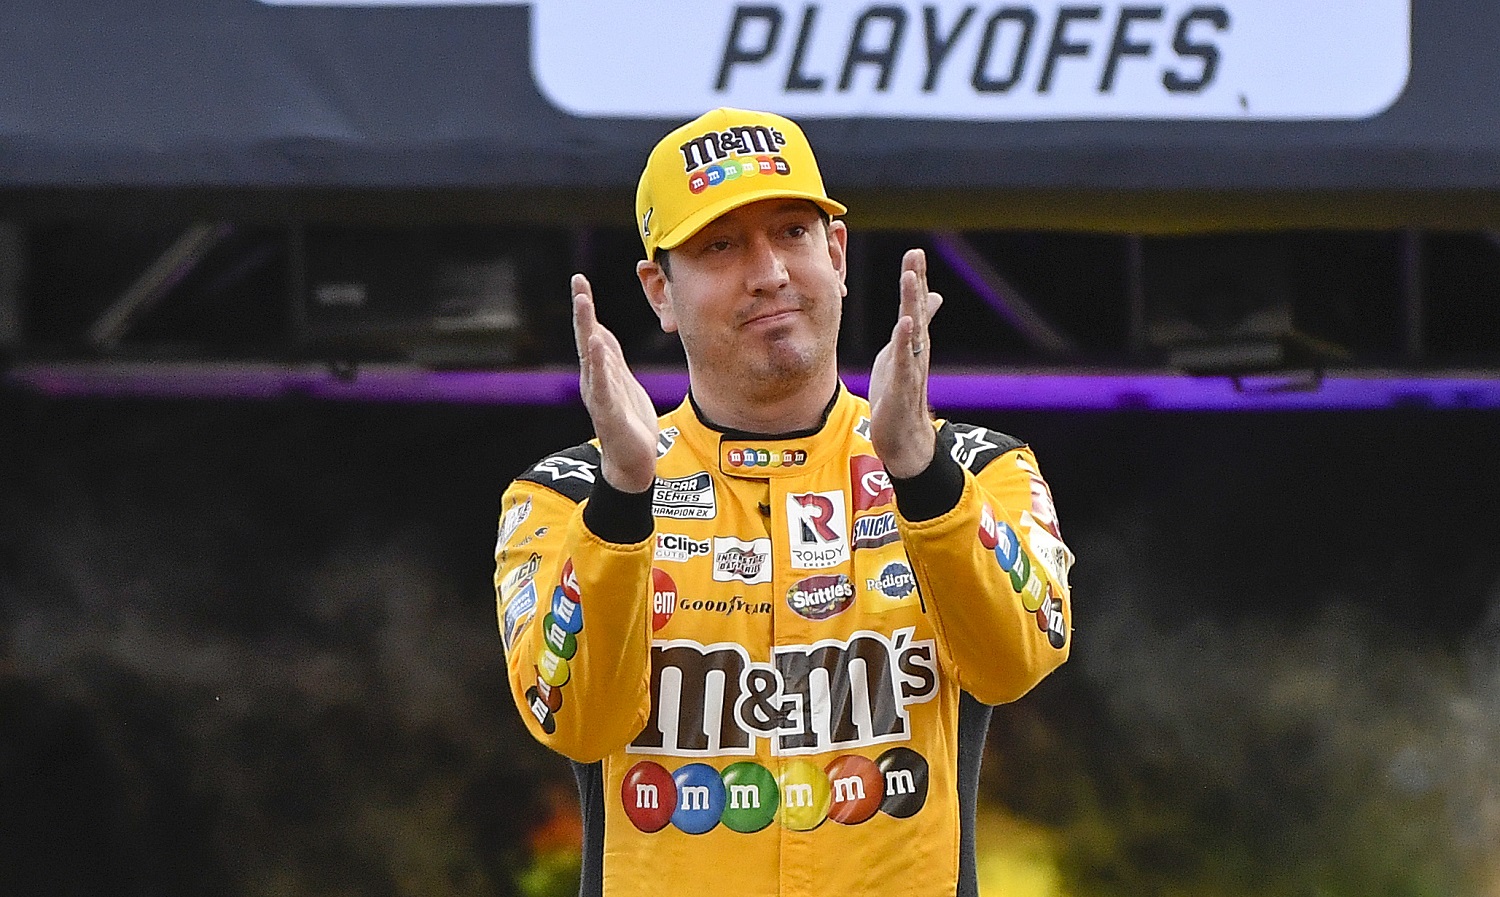 Kyle Busch walks onstage during driver intros for the NASCAR Cup Series Bass Pro Shops Night Race at Bristol Motor Speedway on Sept. 17, 2022.